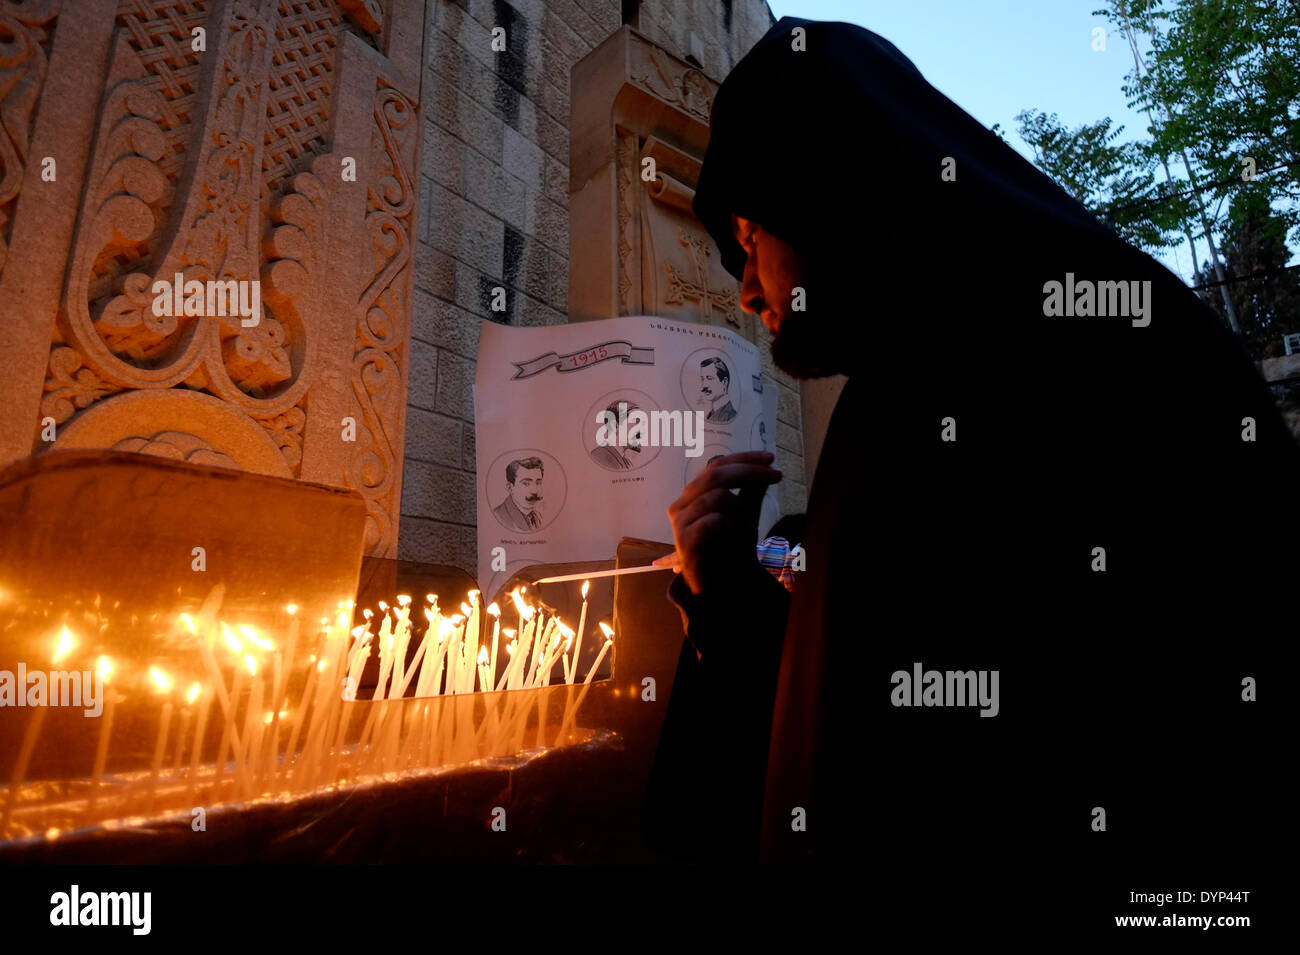 An Armenian priest lights candles at the Armenian Genocide memorial during commemoration ceremony of the 99th anniversary of the Armenian Genocide in the Armenian quarter Old city East Jerusalem Israel on 24  APRIL 2014. Genocide Remembrance Day or Genocide Memorial day, is observed by Armenians in dispersed communities around the world on April 24 . It is held annually to commemorate the victims of the Armenian Genocide from 1915 to 1923. Stock Photo